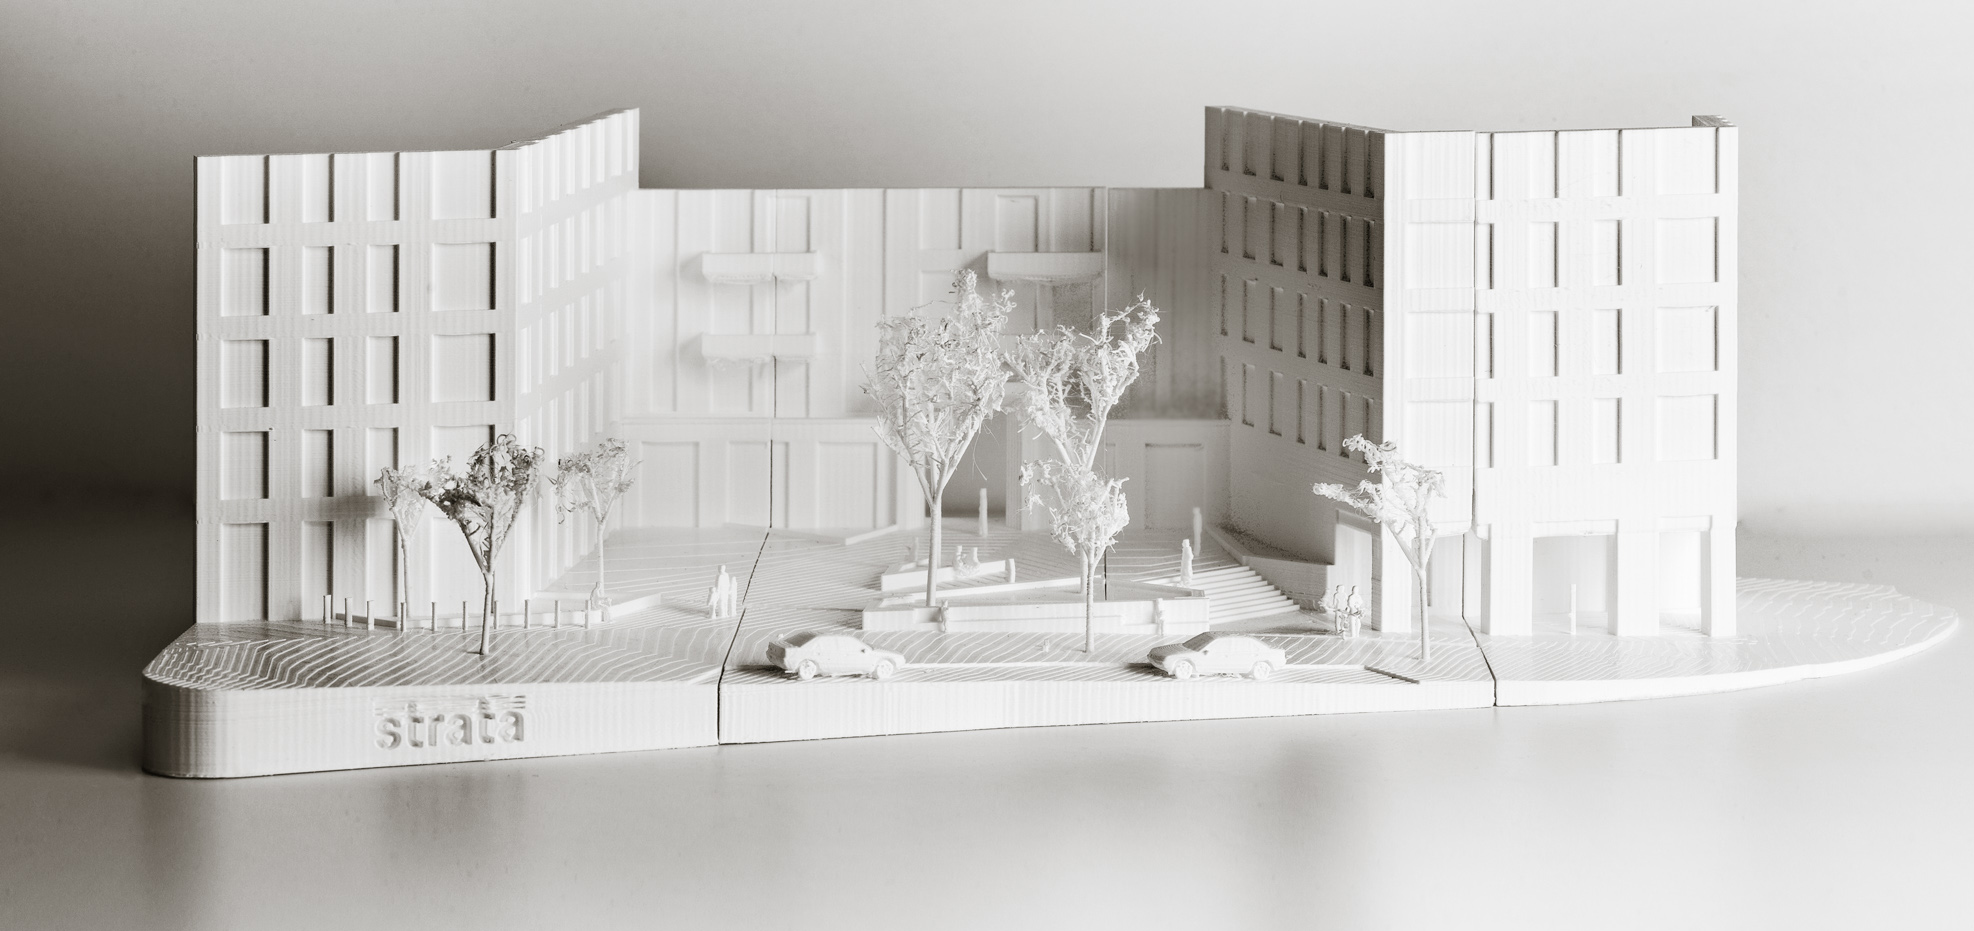 Image of Strata Design Associates 3D print of HUB mixed-use development, Chesterfield House